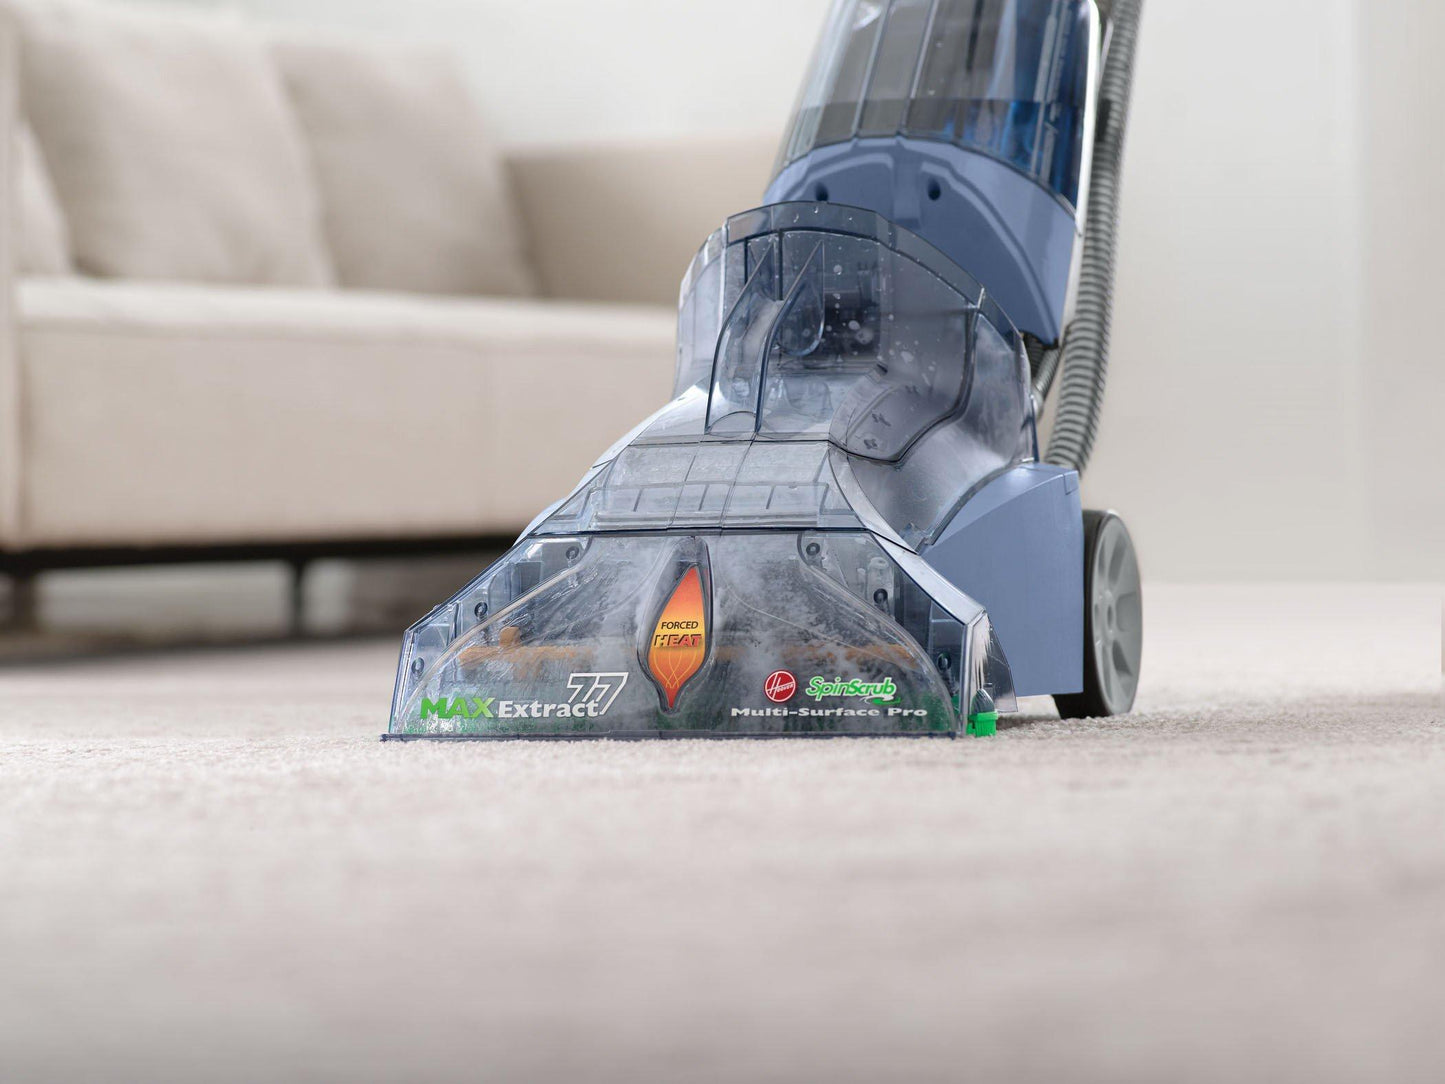 Reconditioned Max Extract 77 Hard Floor Cleaner